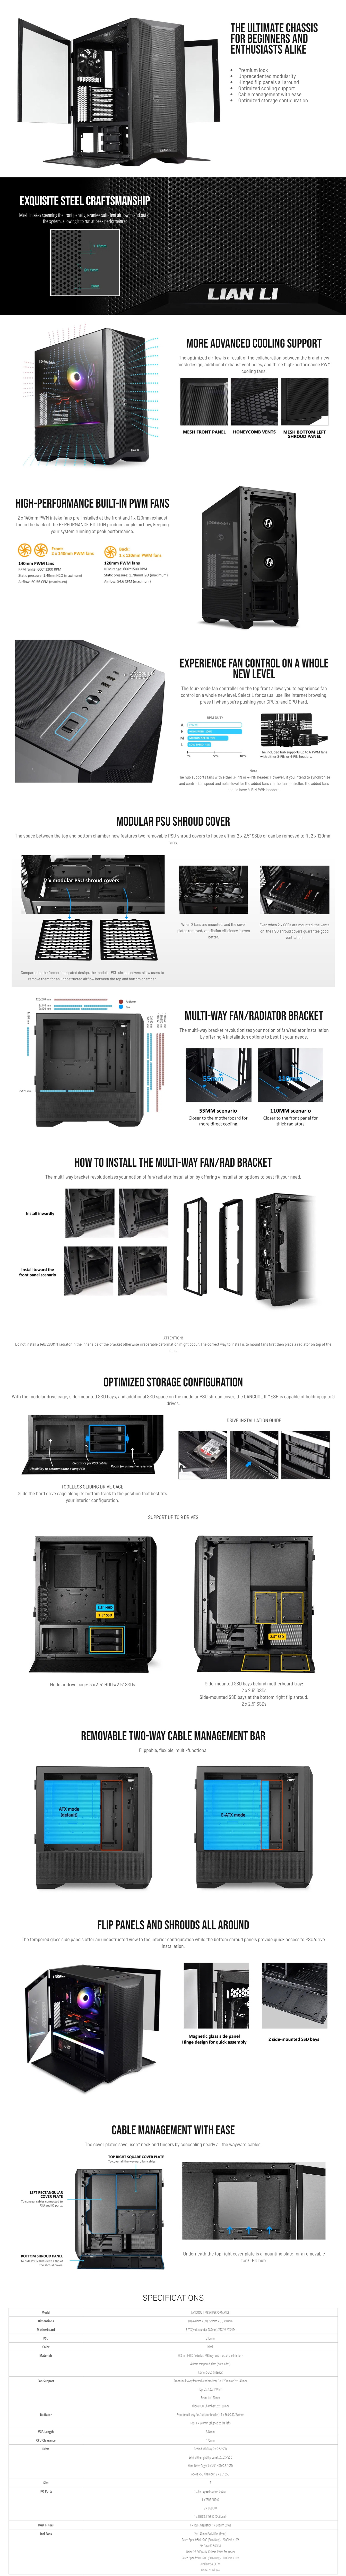 A large marketing image providing additional information about the product Lian Li Lancool II Mesh Performance Mid Tower Case - Black - Additional alt info not provided